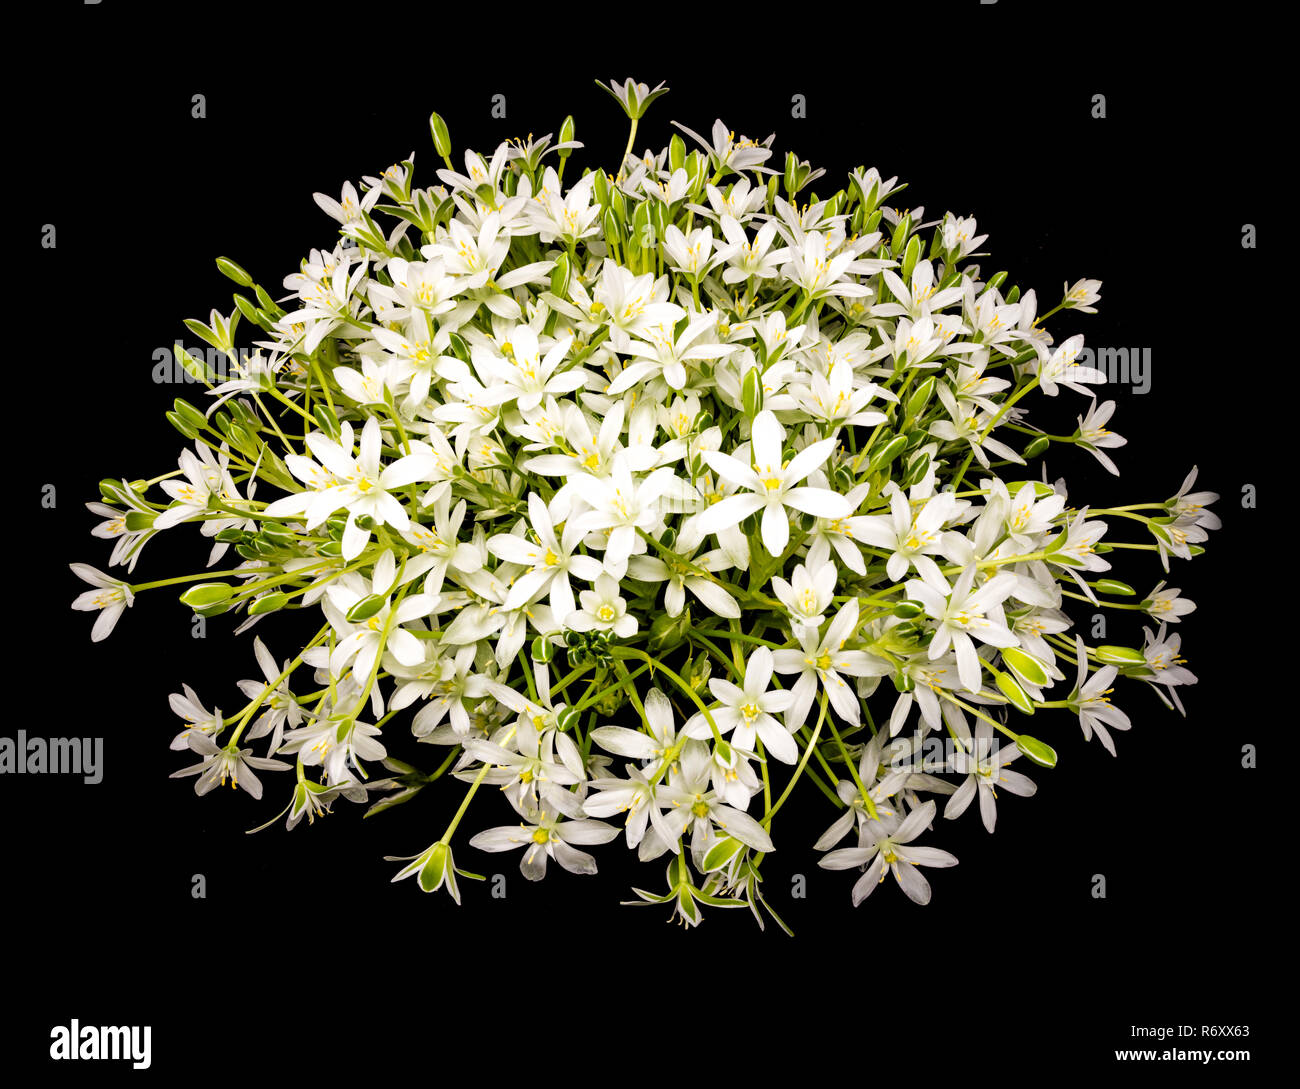 bouquet of umbels of daisy flowers against a black background Stock Photo